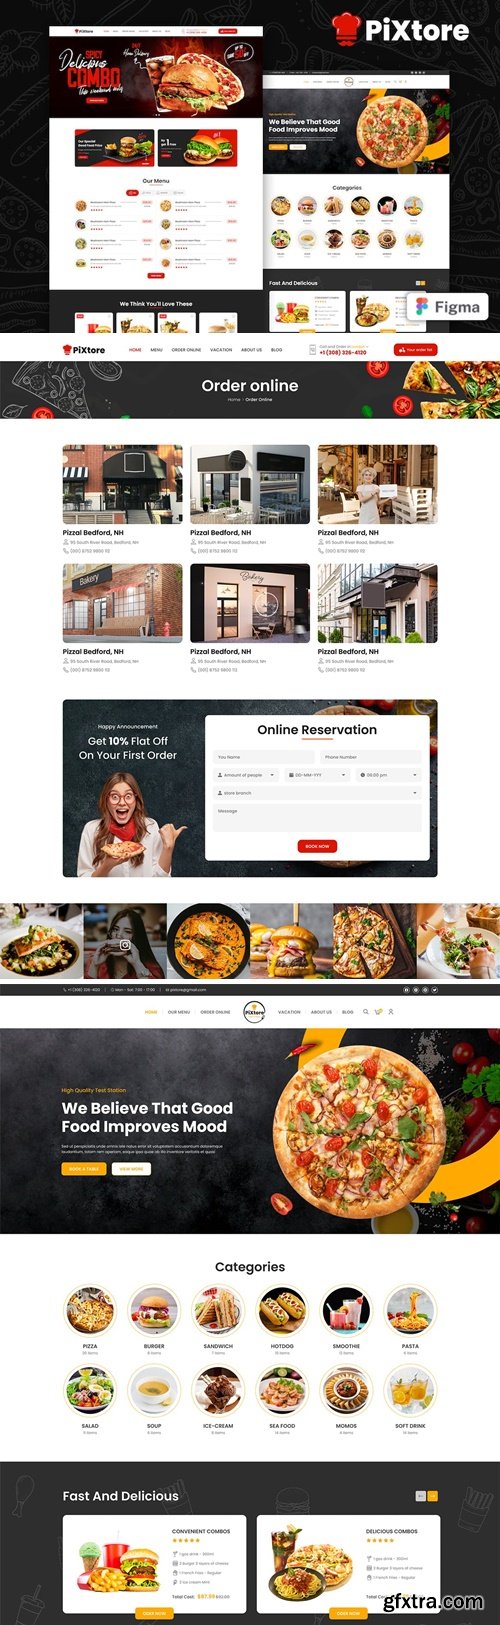 PiXtore - Pizza and Restaurant Figma Template P6449RS